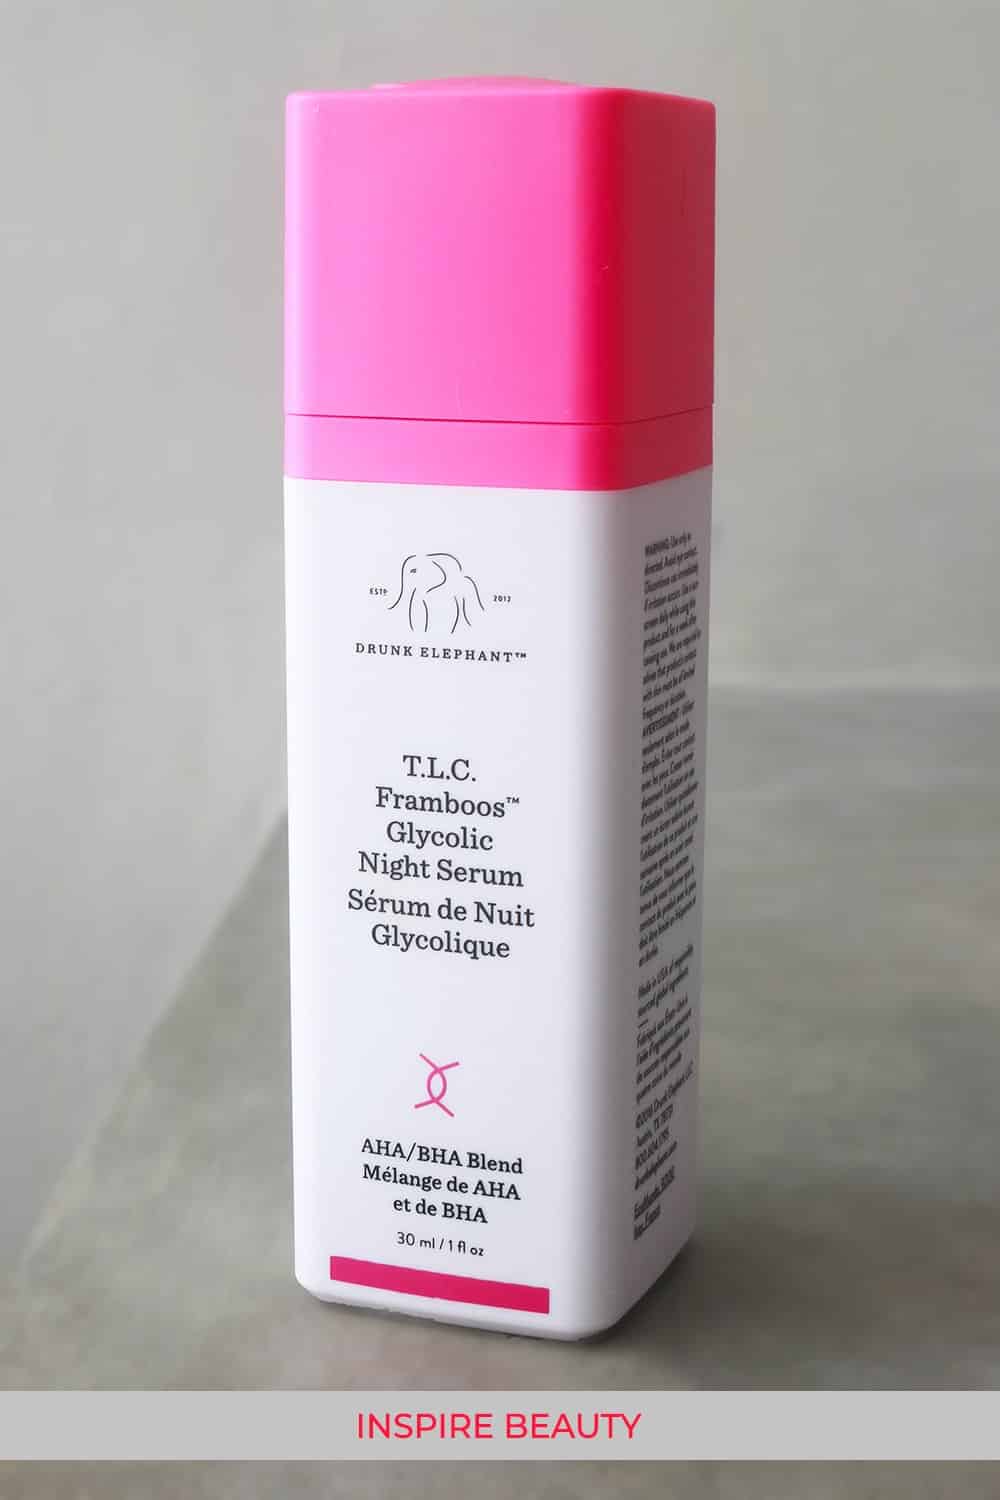 Drunk Elephant TLC Framboos Glycolic Night Serum review. This serum exfoliates, smoothes the skin and makes it bright and even